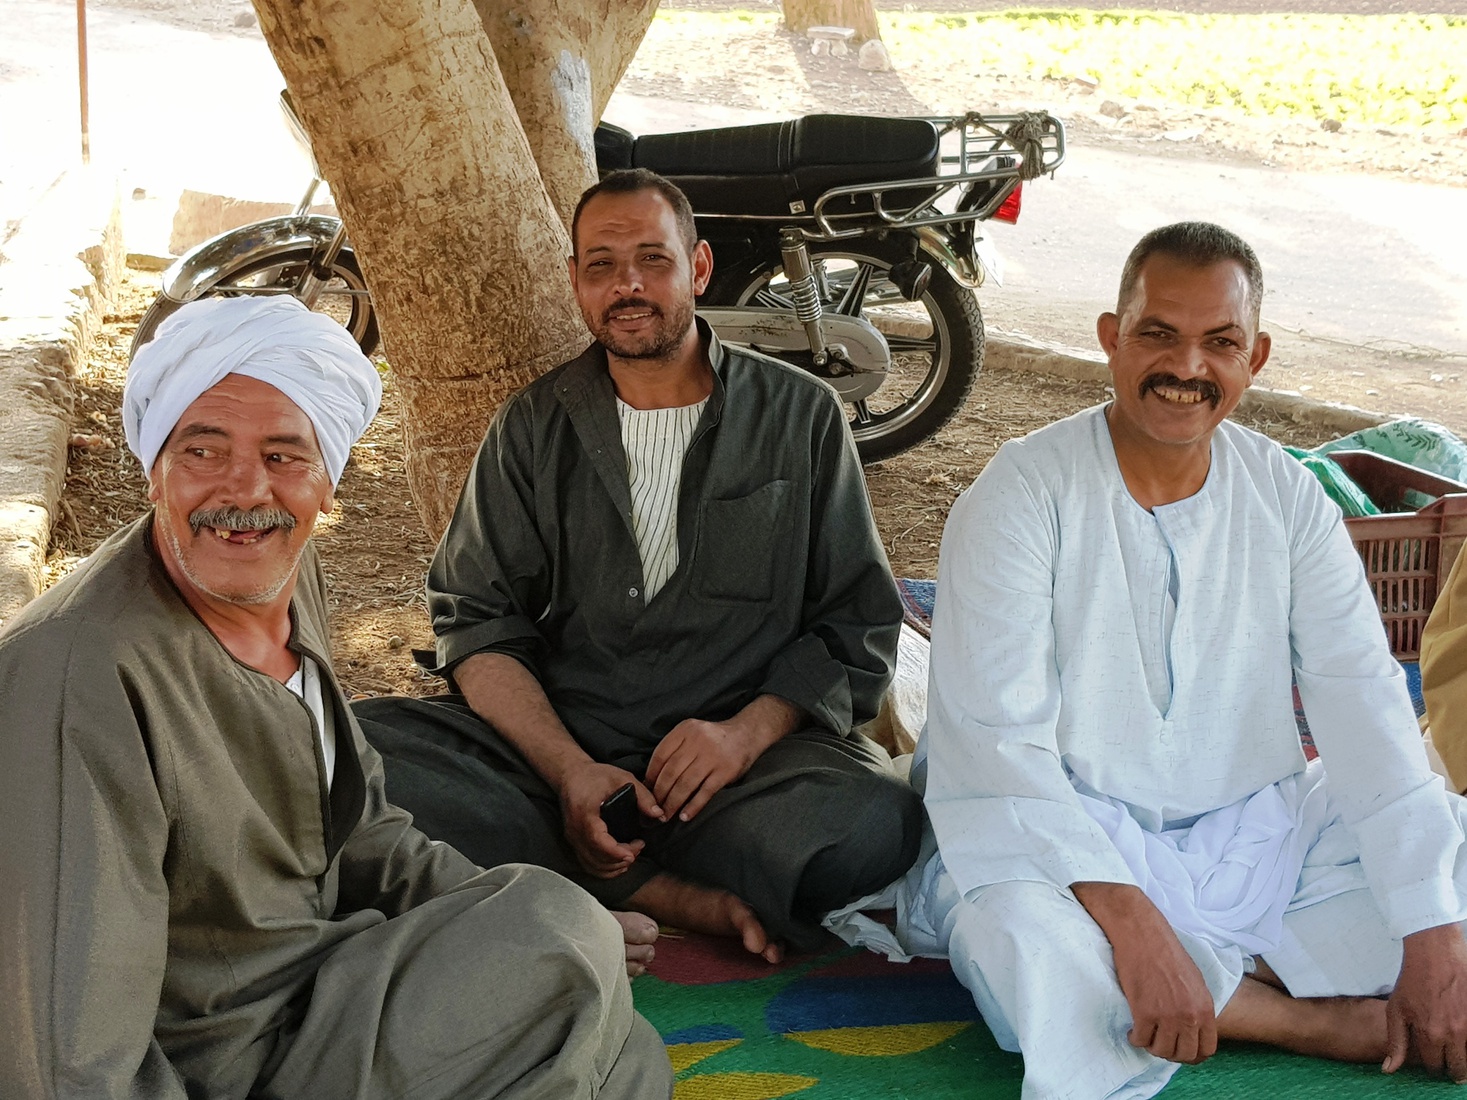 Humans of the world 34/Egypt